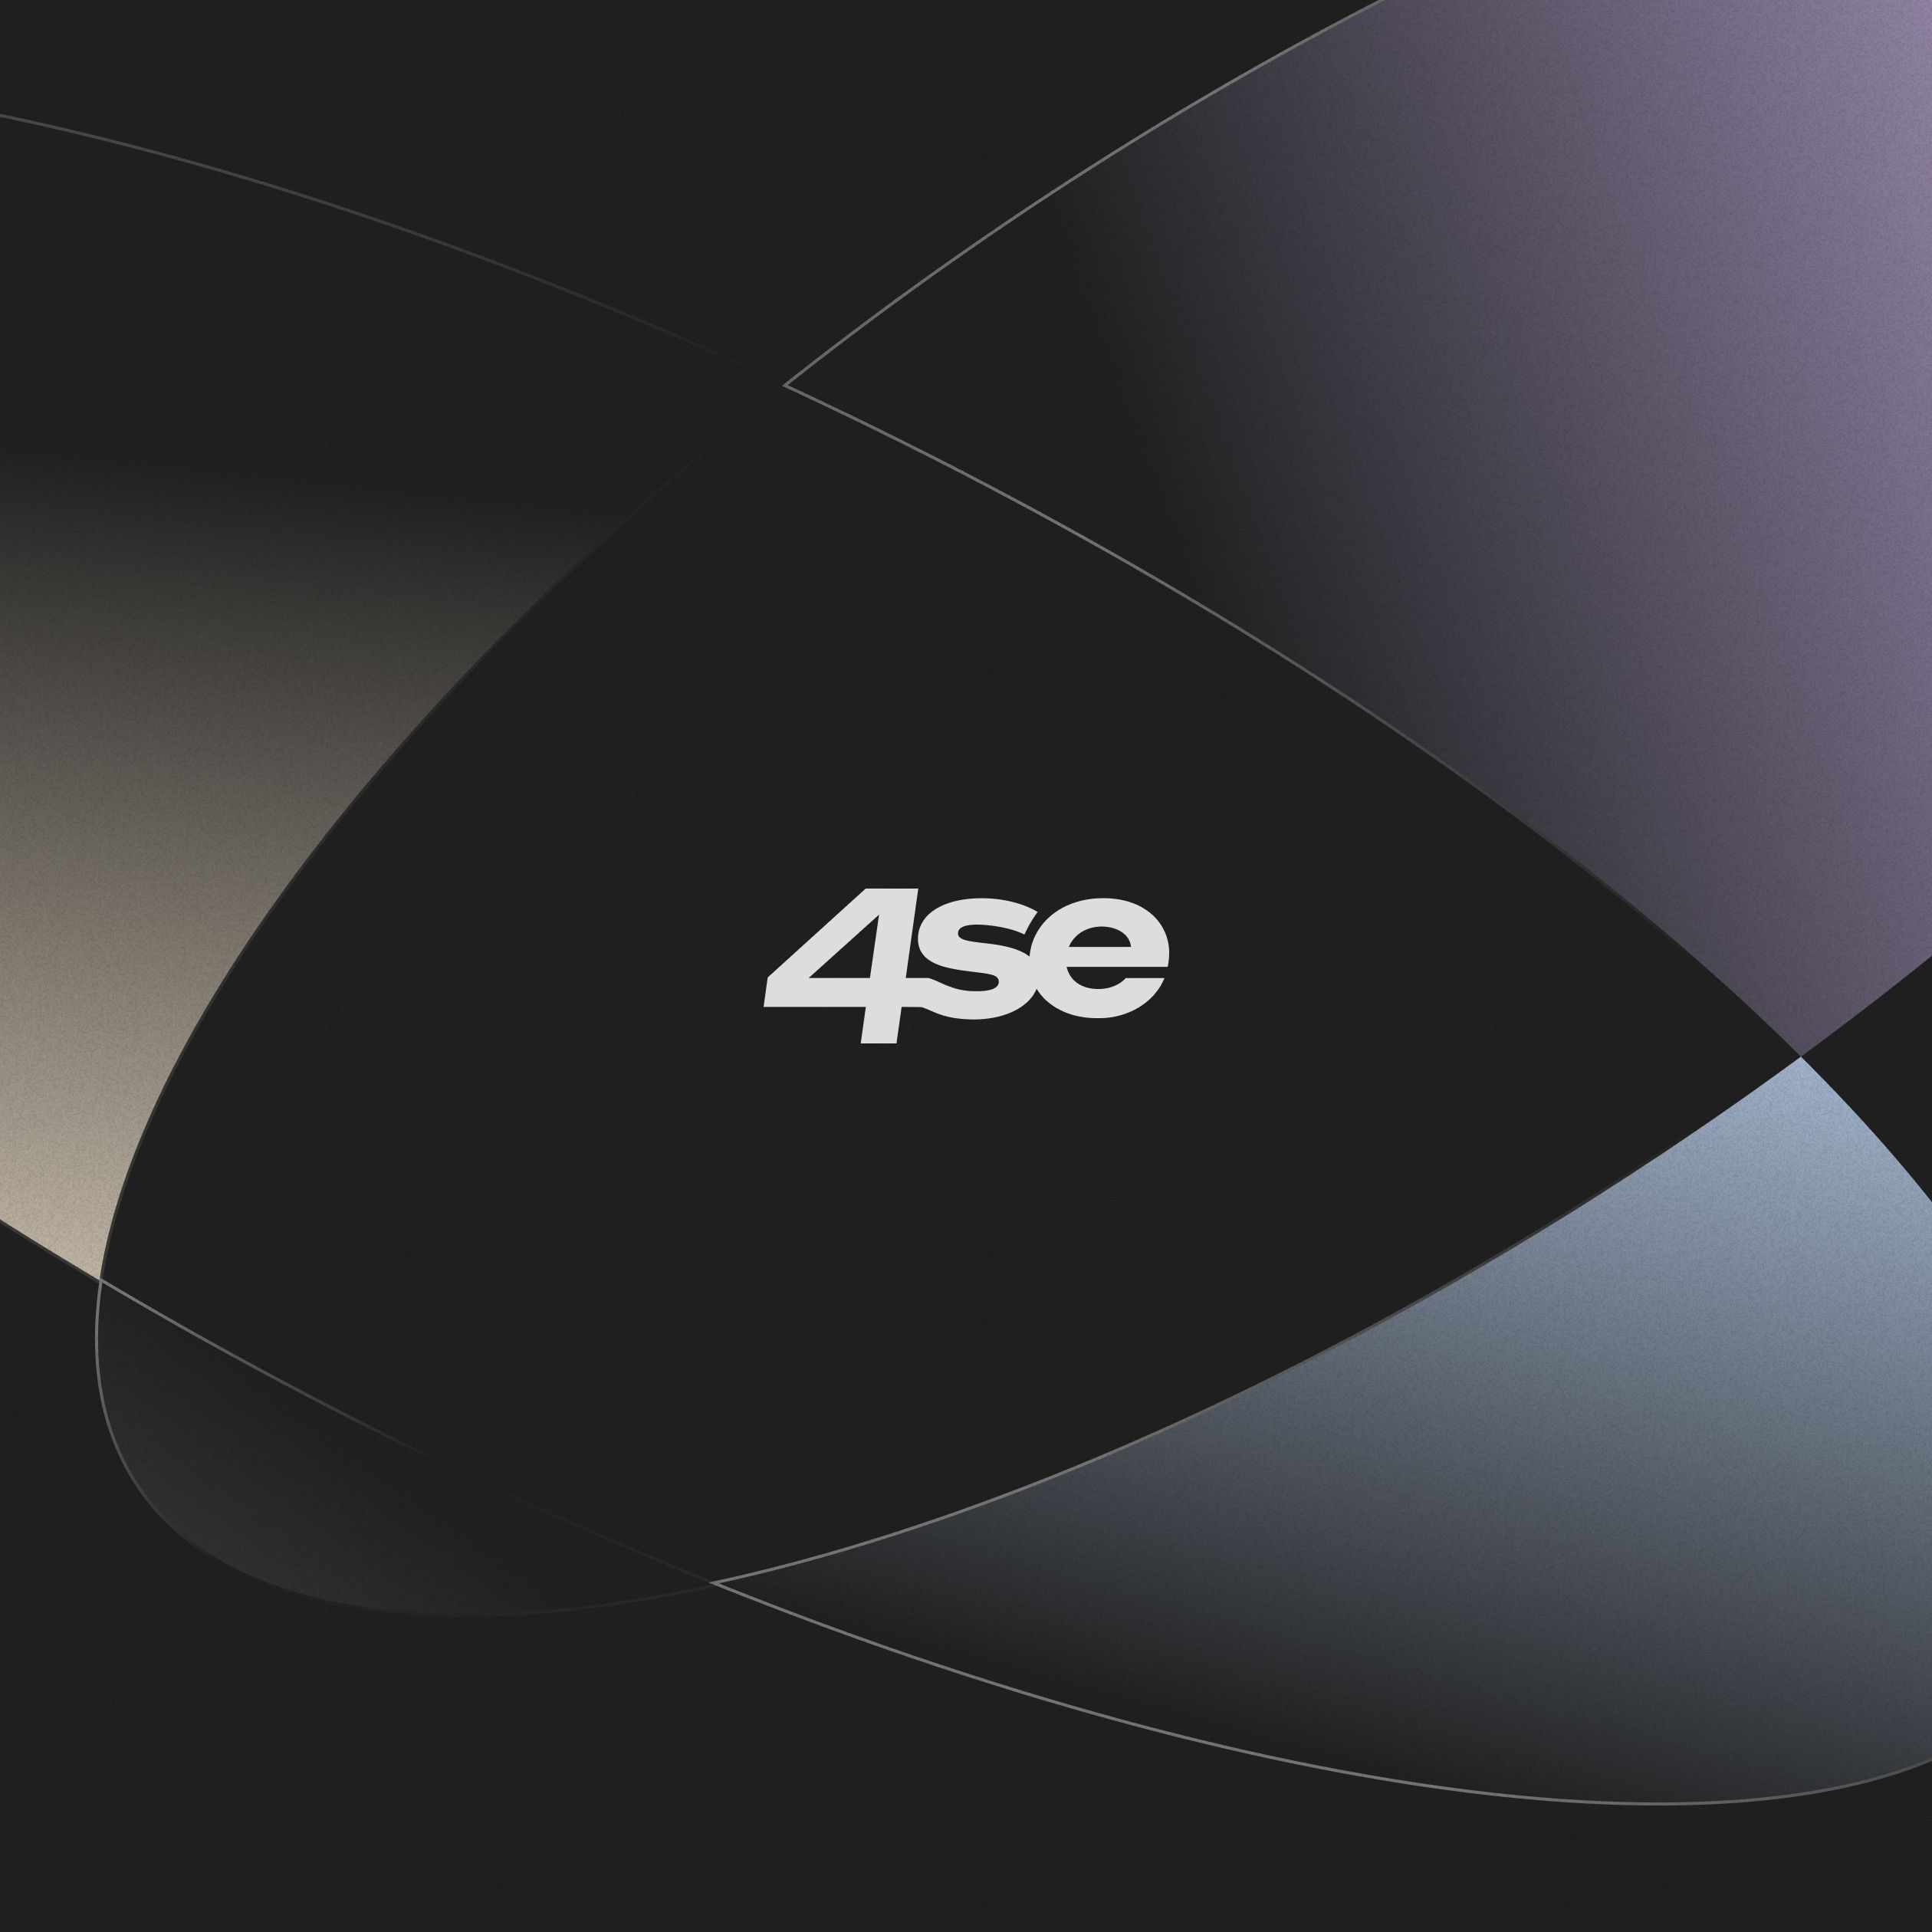 Abstract representation of the 4se logo, featuring unique and artistic design elements